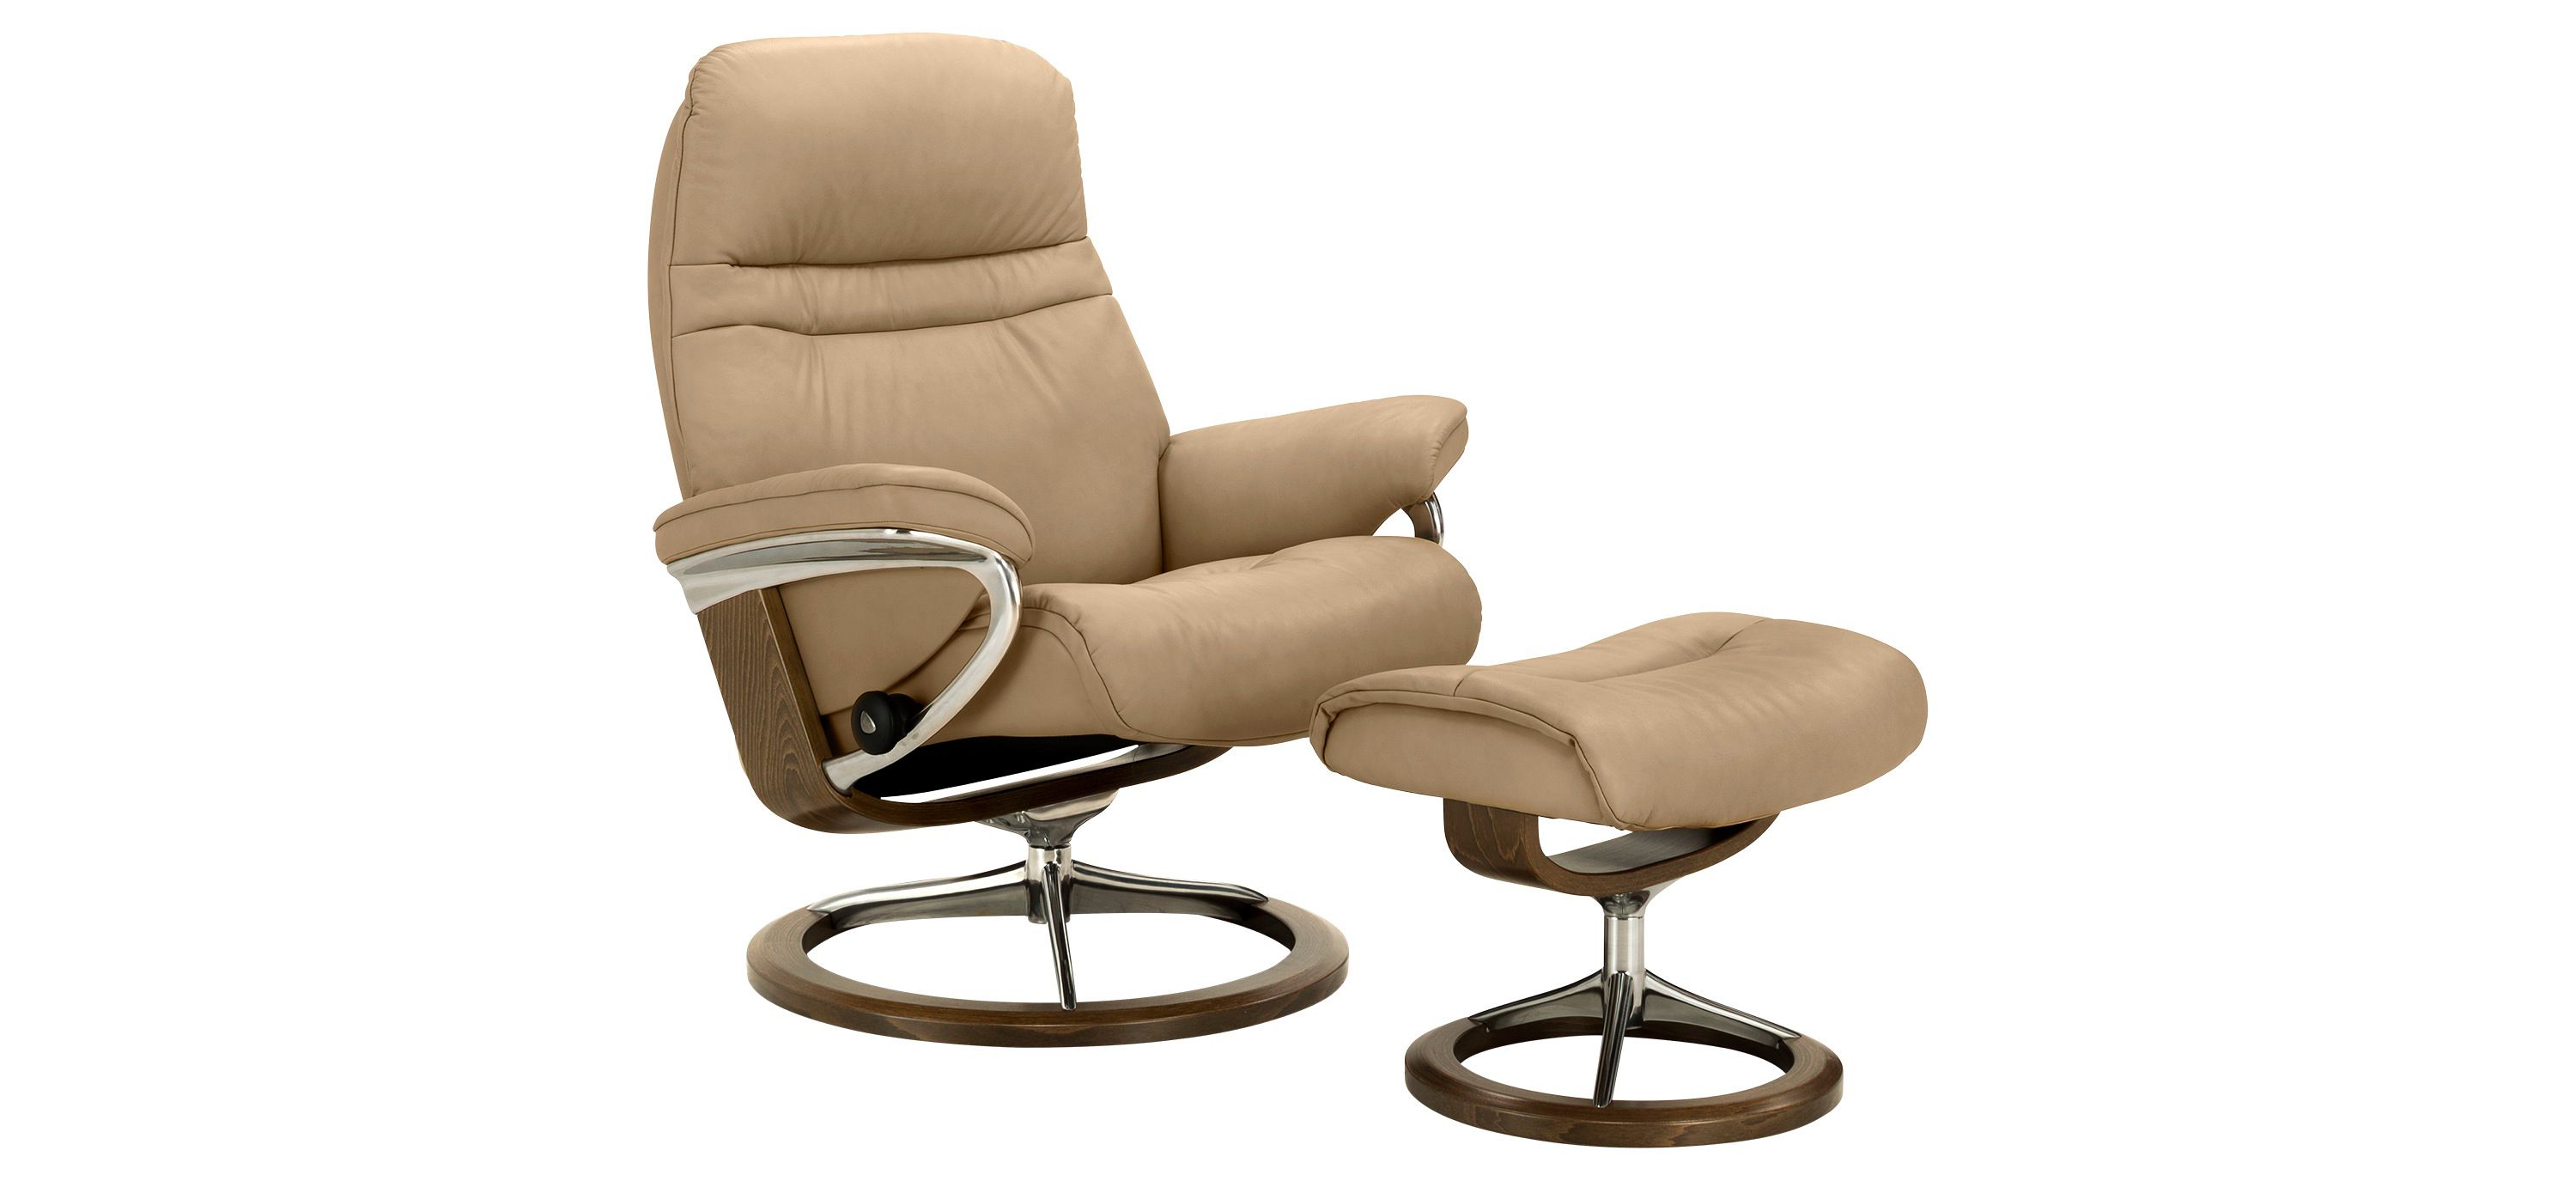 Stressless Sunrise Large Leather Chair and Ottoman